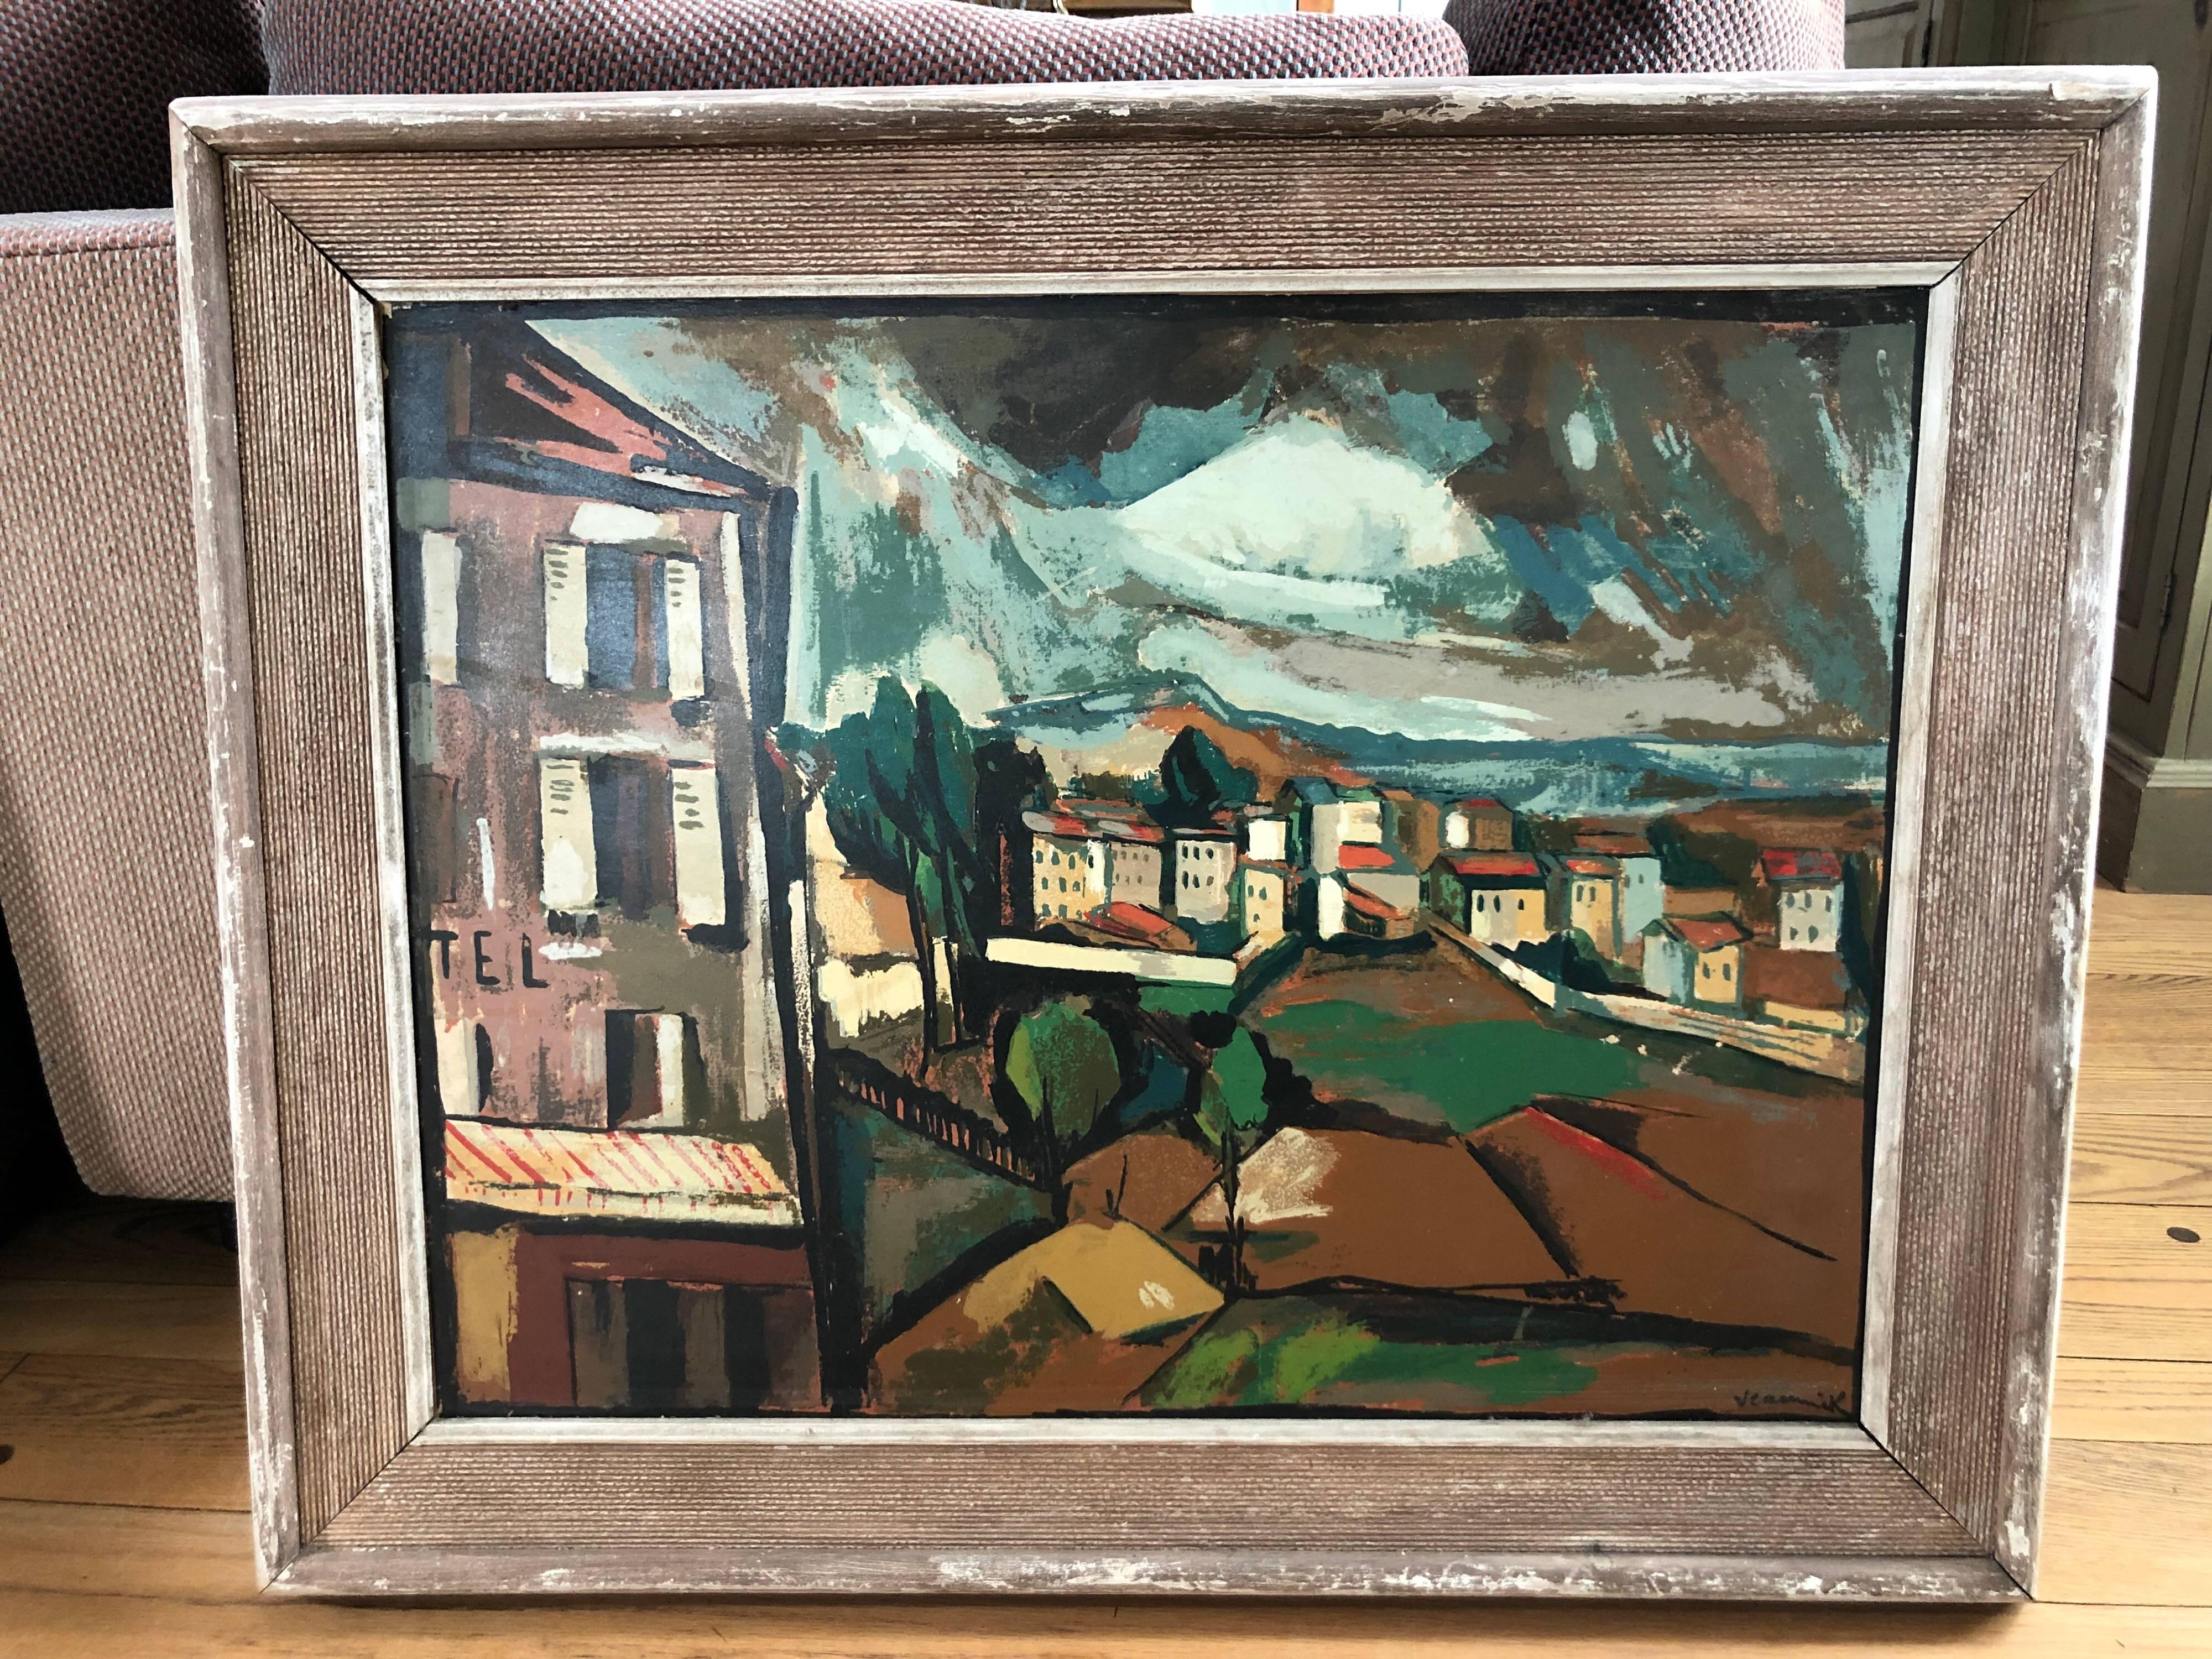 Signed Mid Century Seriagraph on board by Maurice De Vlamink.  Original frame. Signed lower right. Amazing hue of colors and compostion bringing this villagescape to life.

Fauvist in style.  Maurice de Vlaminck (4 April 1876 – 11 October 1958) was